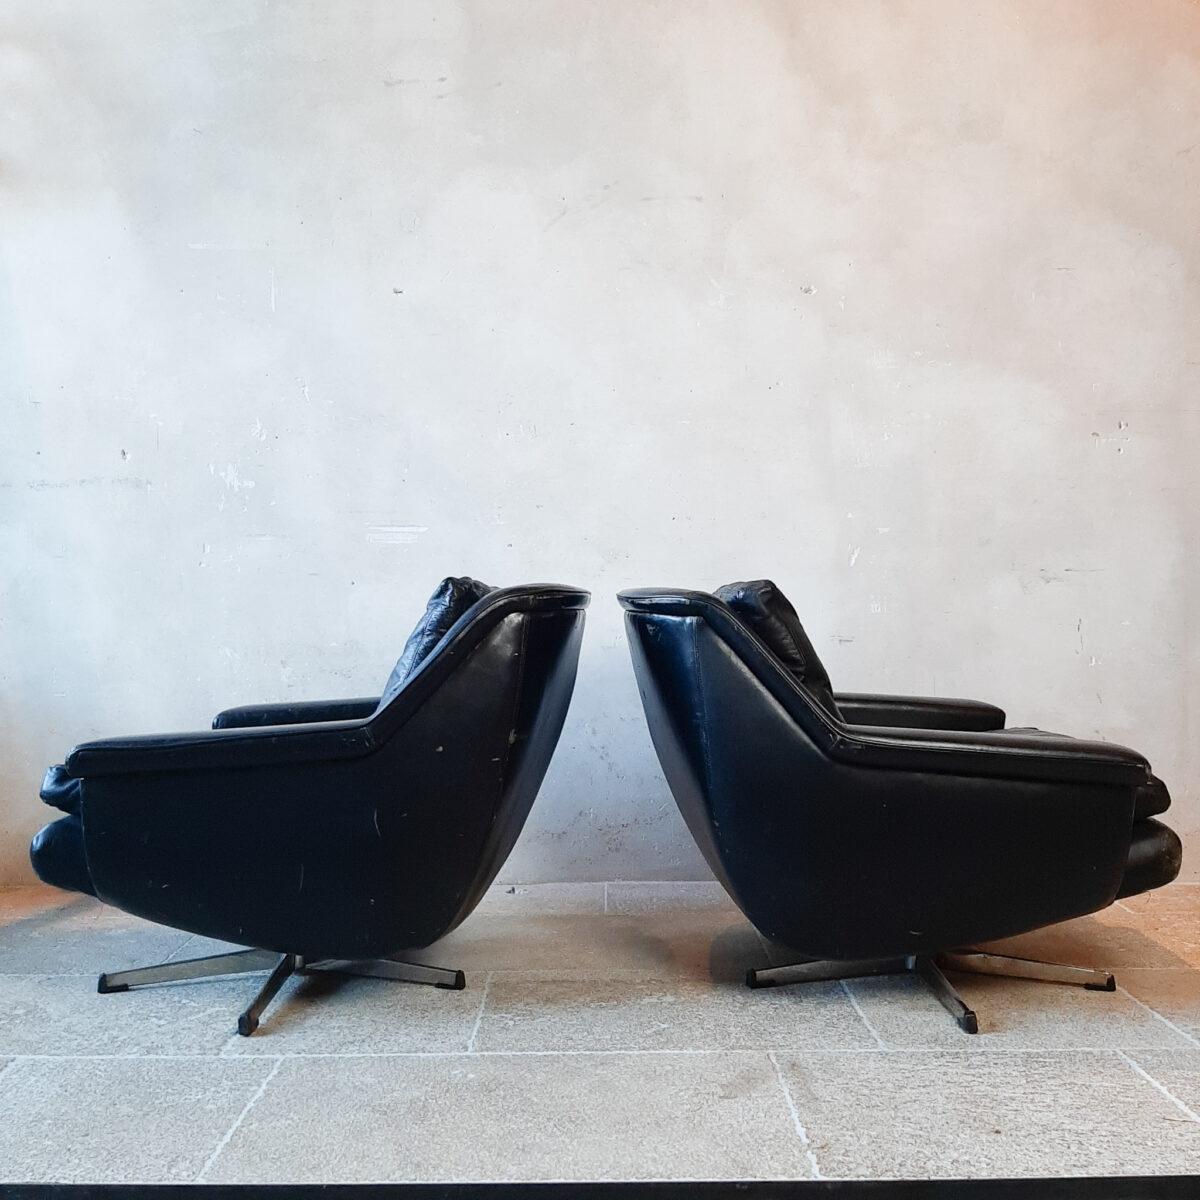 Pair of midcentury Danish swivel chairs / armchairs, by Werner Langefeld for ESA Møbelværk in Denmark during the 1960s. These are the rarer version without the headrest. The club chairs are in original condition, upholstered with black leather on a